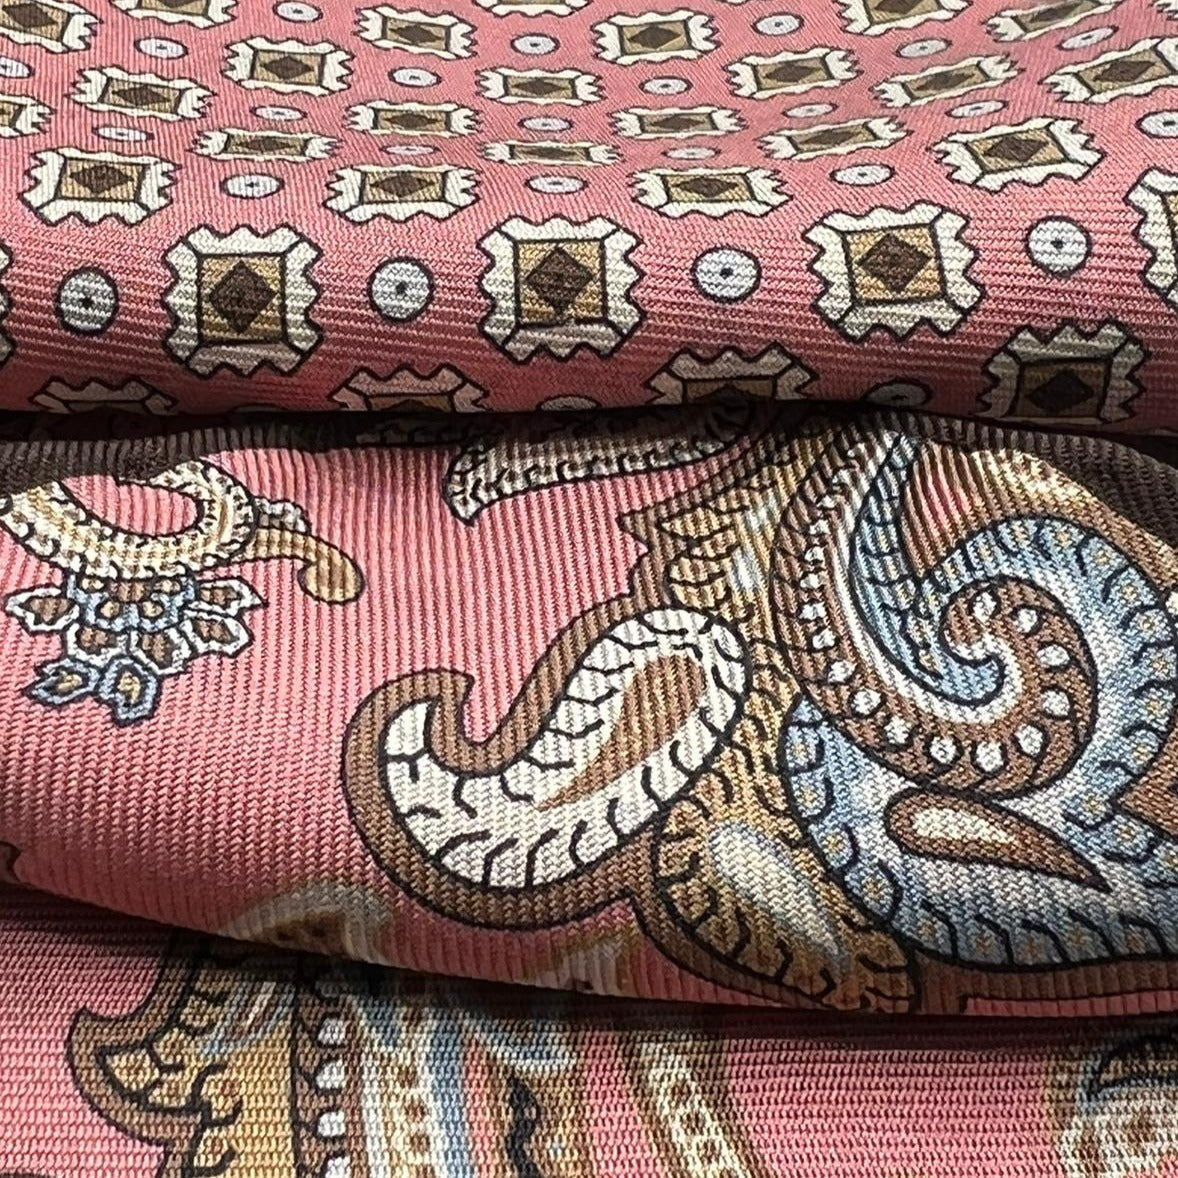 Holliday & Brown Hand-rolled   Holliday & Brown for Cruciani & Bella 100% Silk Antique Pink colour, Light Brown and Off White Double Faces Paisley  Motif  Pocket Square Handmade in Italy 32 cm X 32 cm